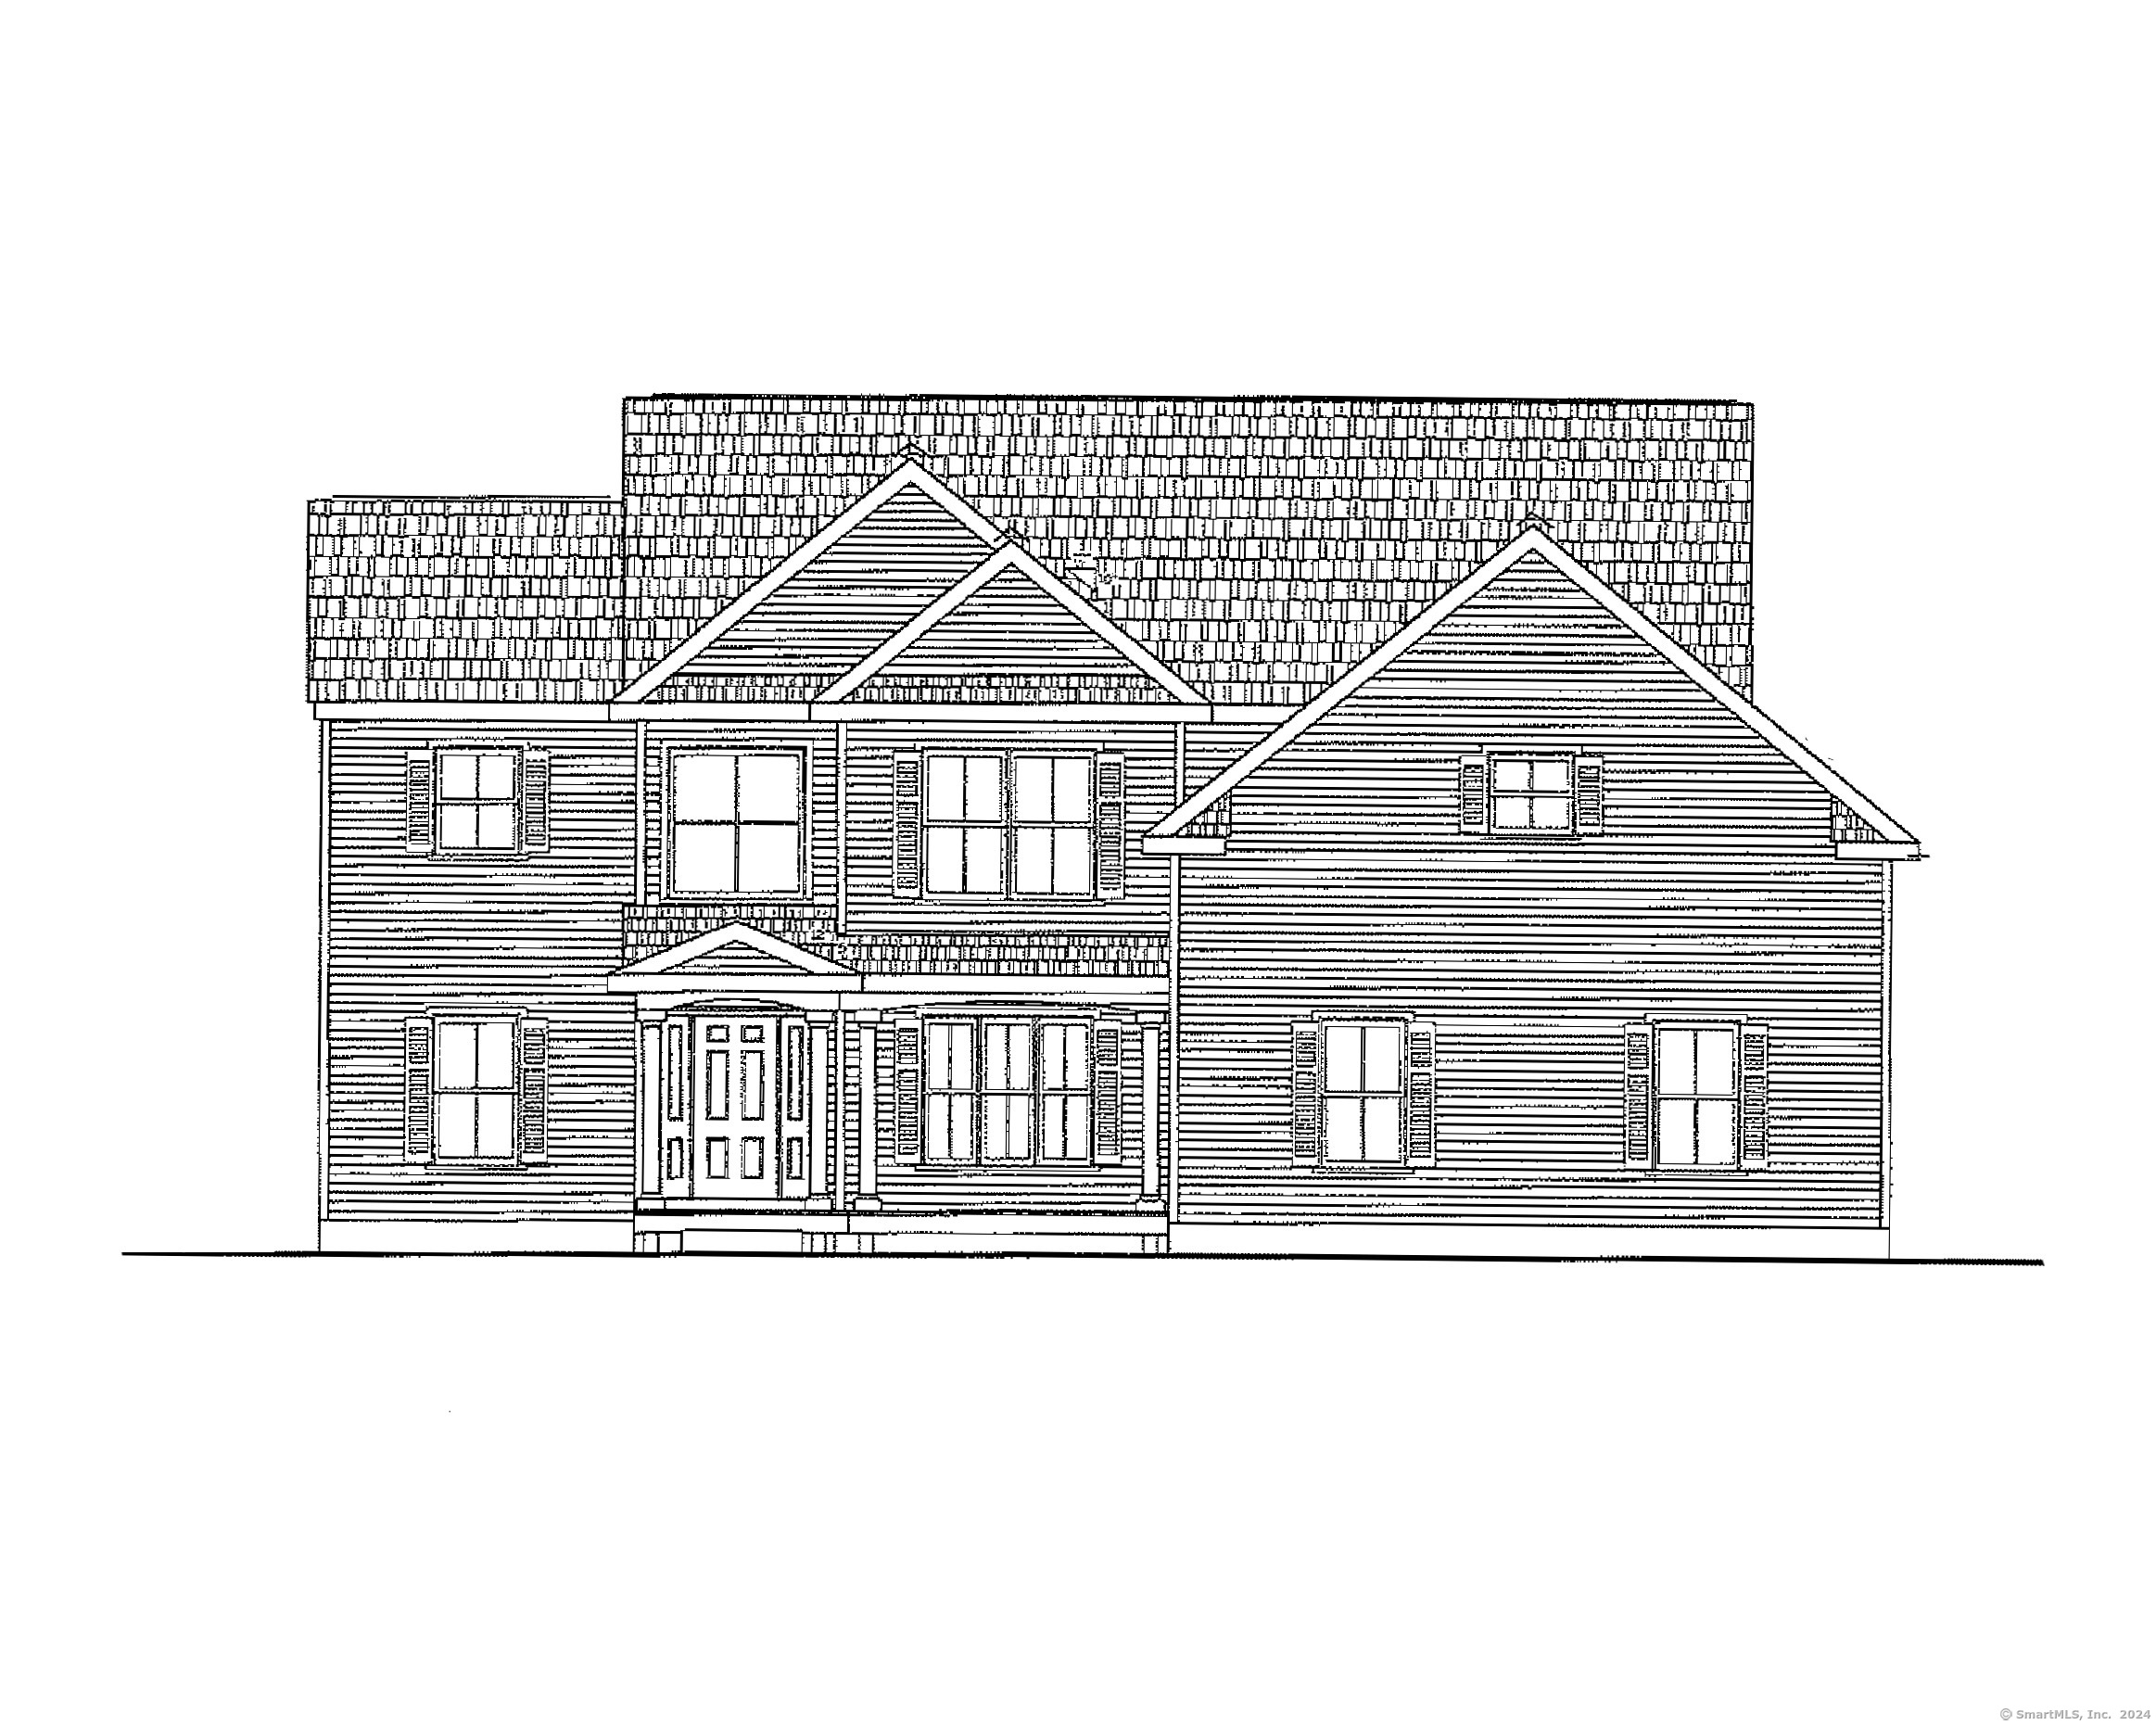 Whispering Oaks  Lot 6 Court, Cheshire, Connecticut - 4 Bedrooms  
3 Bathrooms  
8 Rooms - 